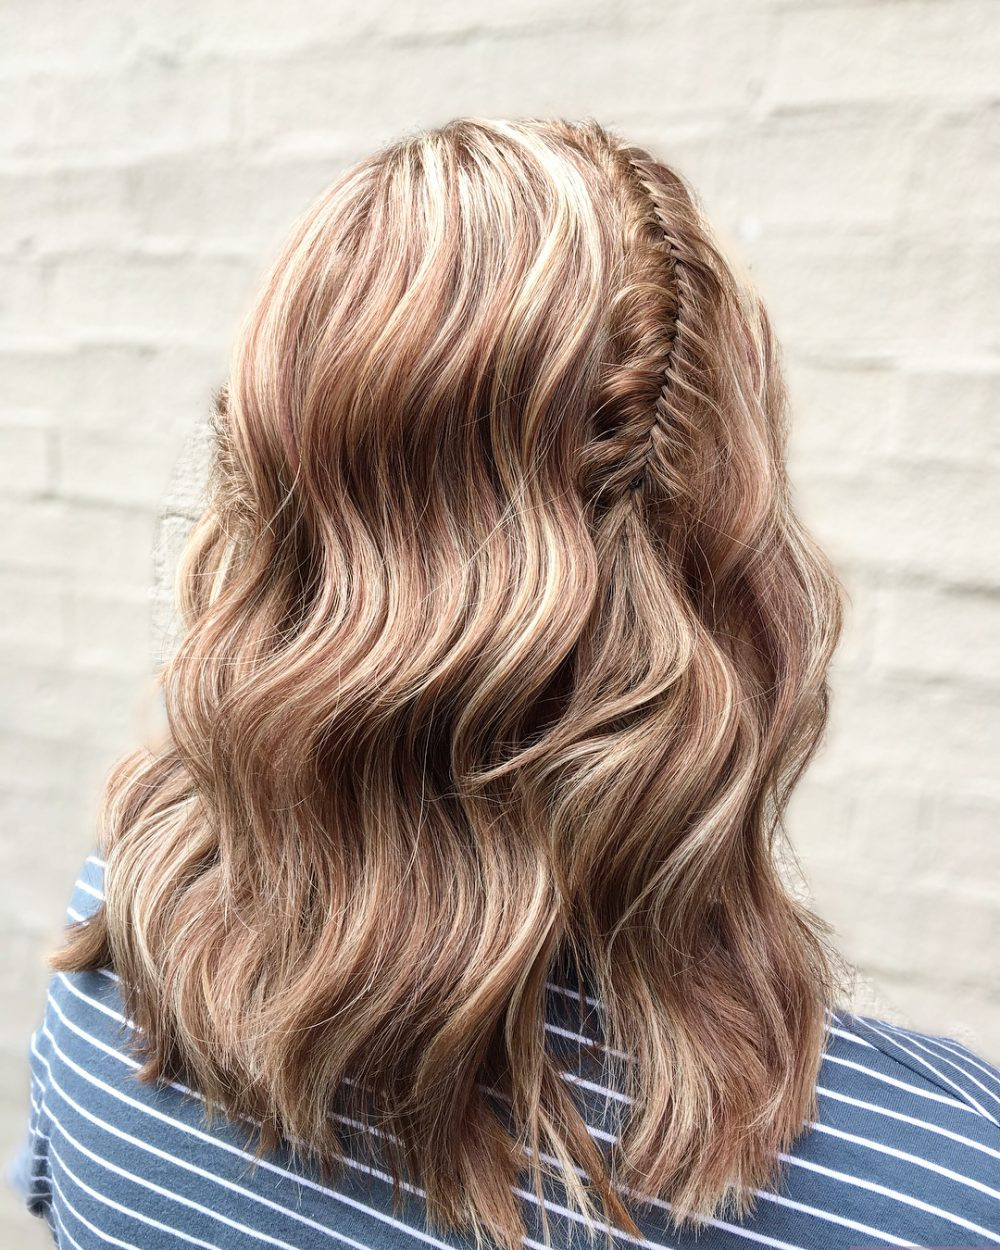 Meduim Prom Hairstyles
 29 Cutest Prom Hairstyles for Medium Length Hair for 2019